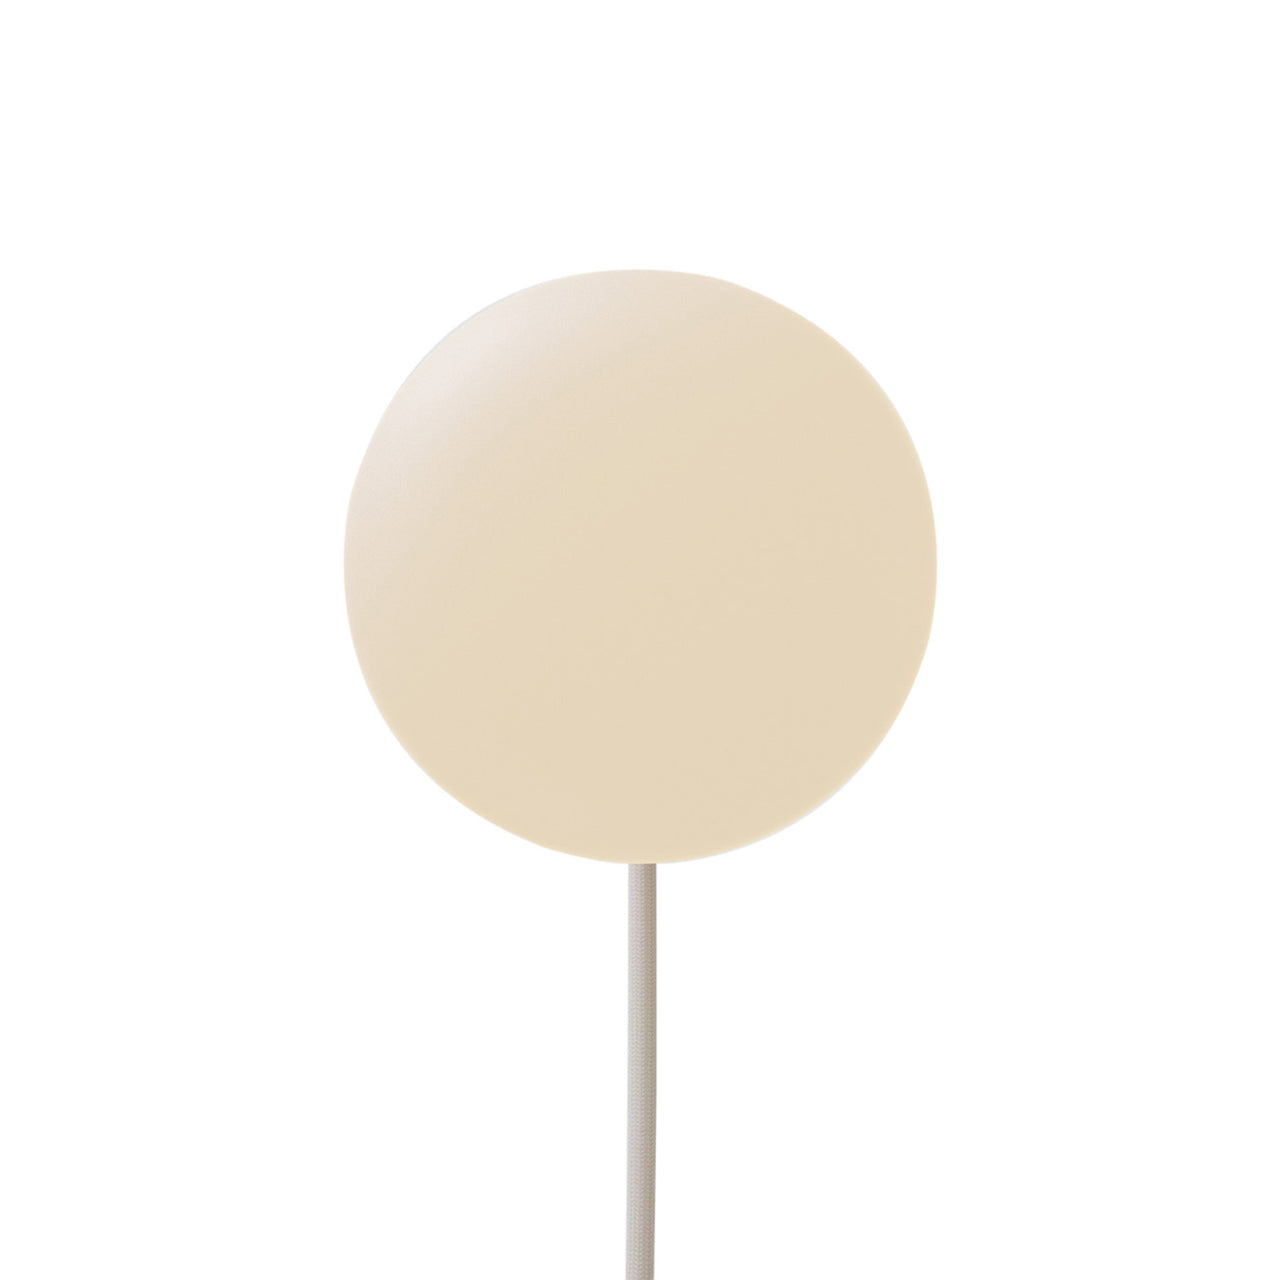 Parc 01 Table Lamp: Handswitch + White